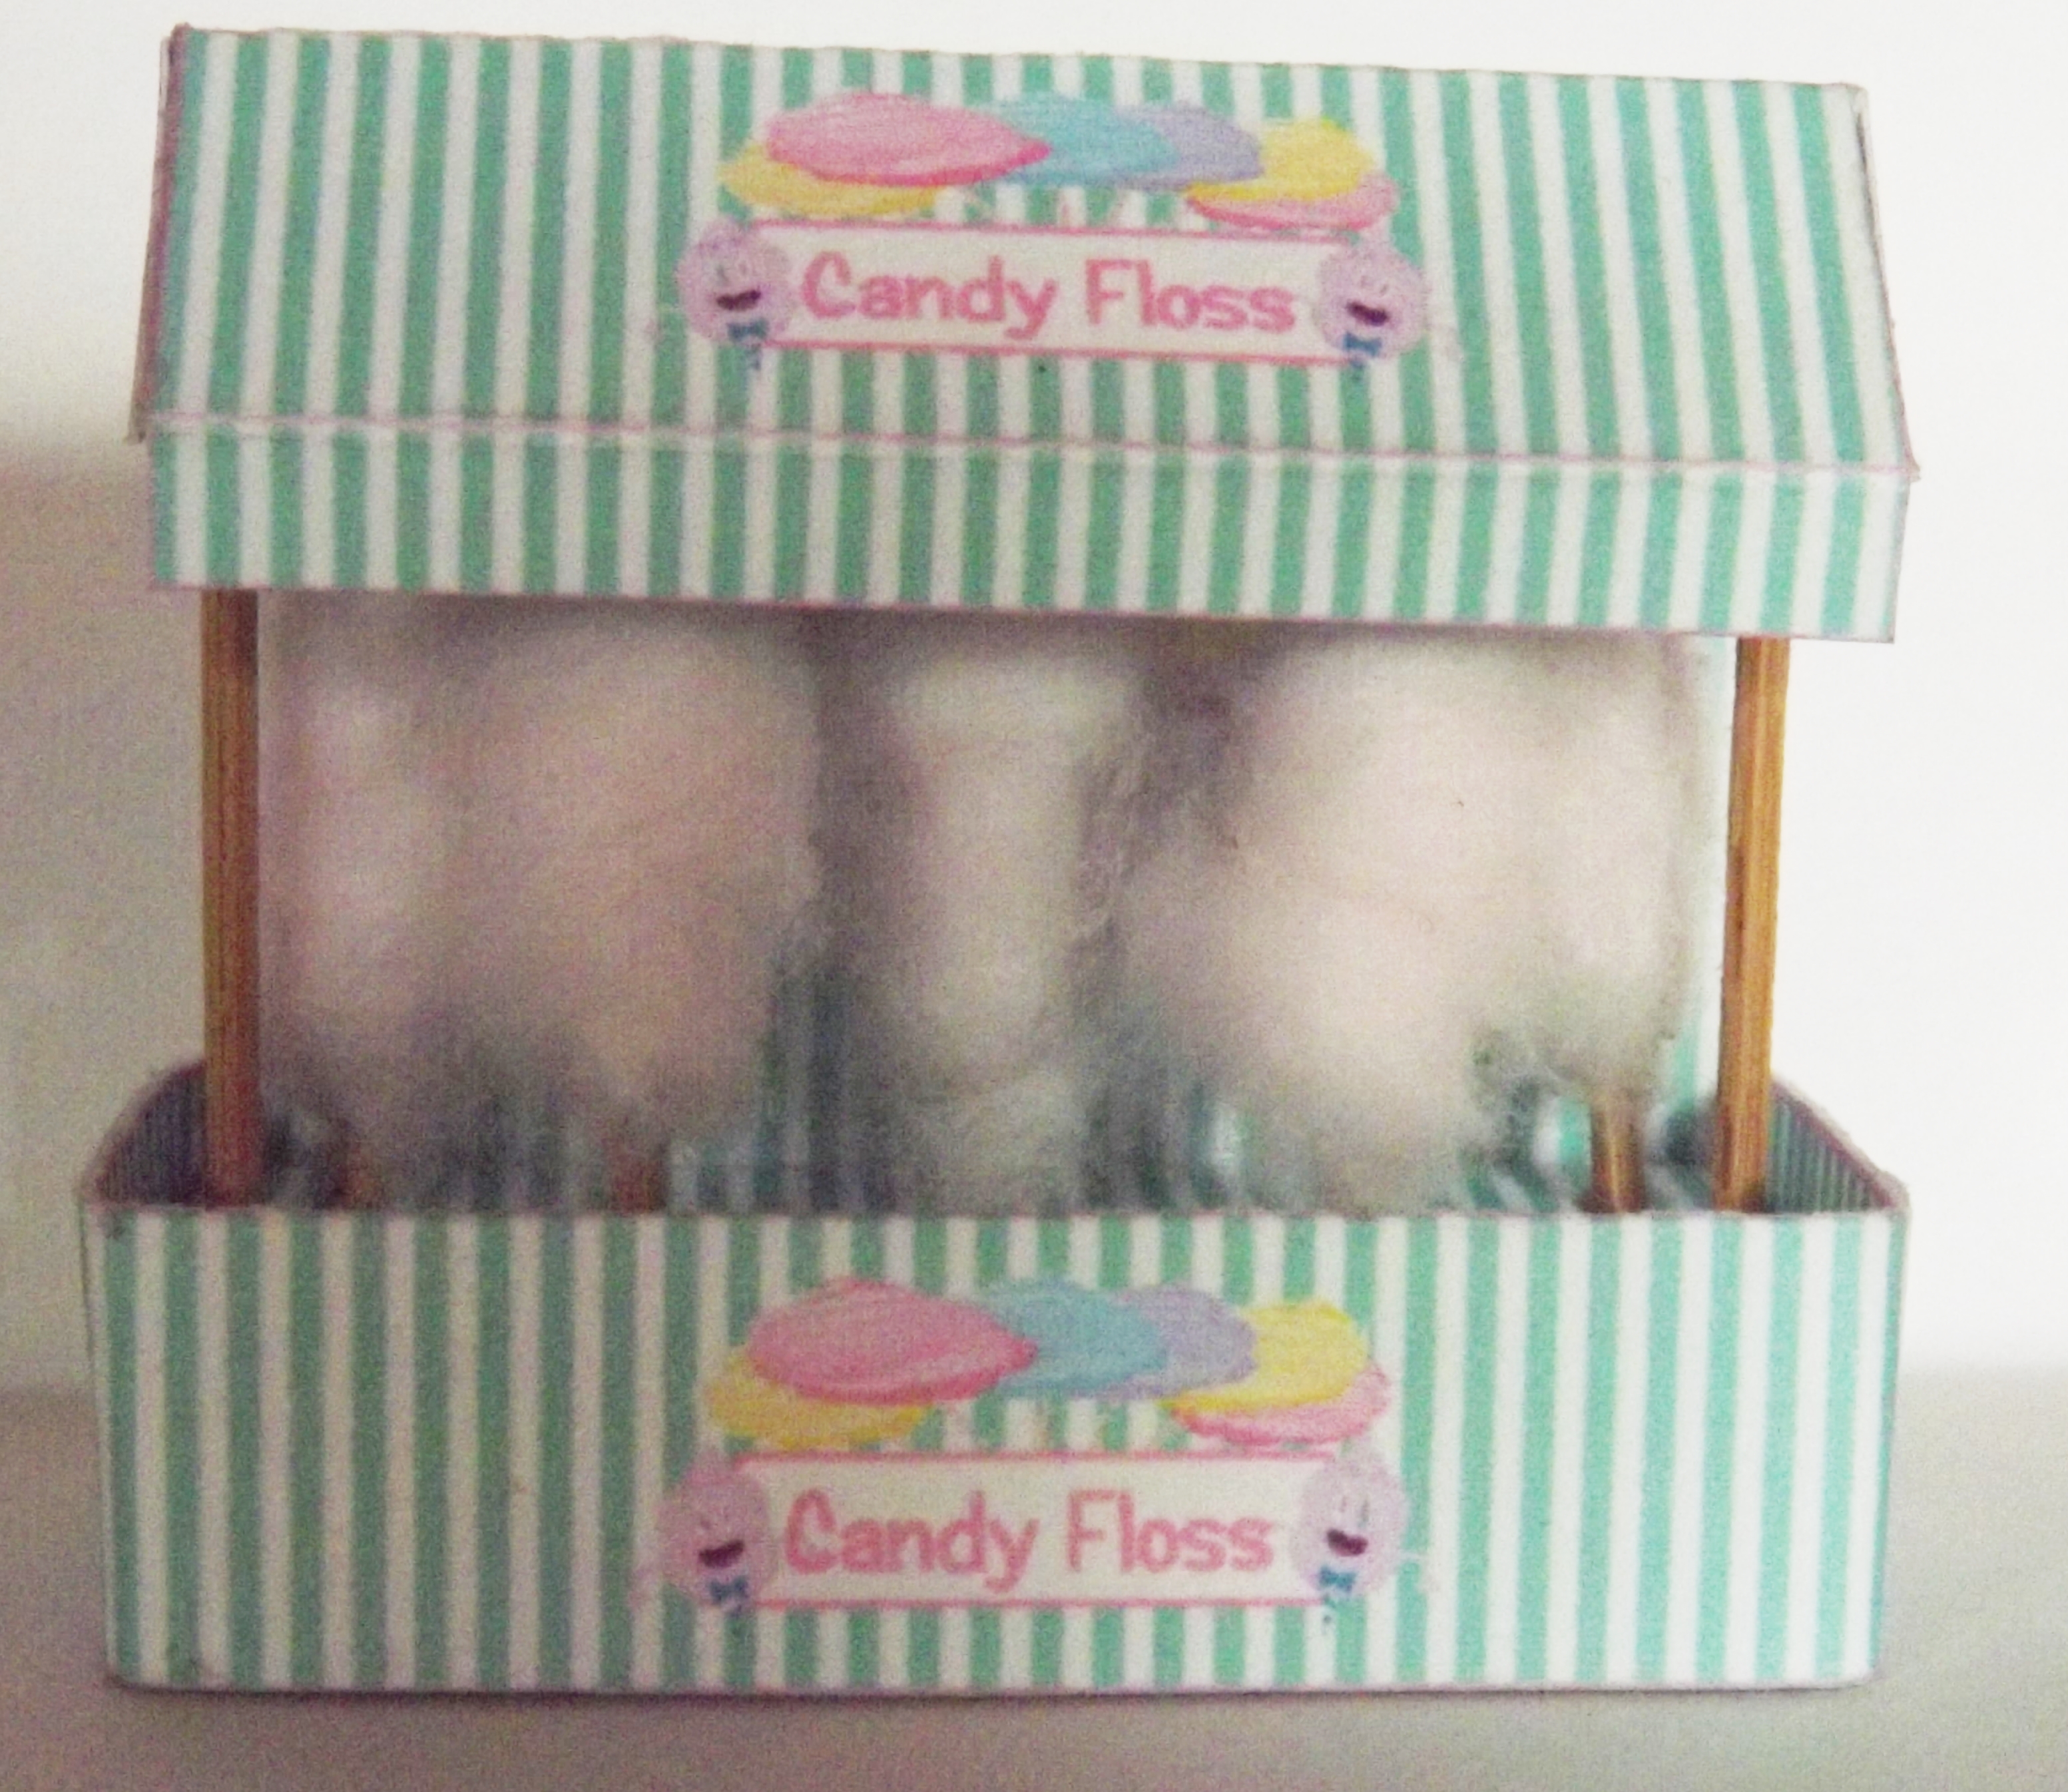 CANDY FLOSS DISPLAY STAND